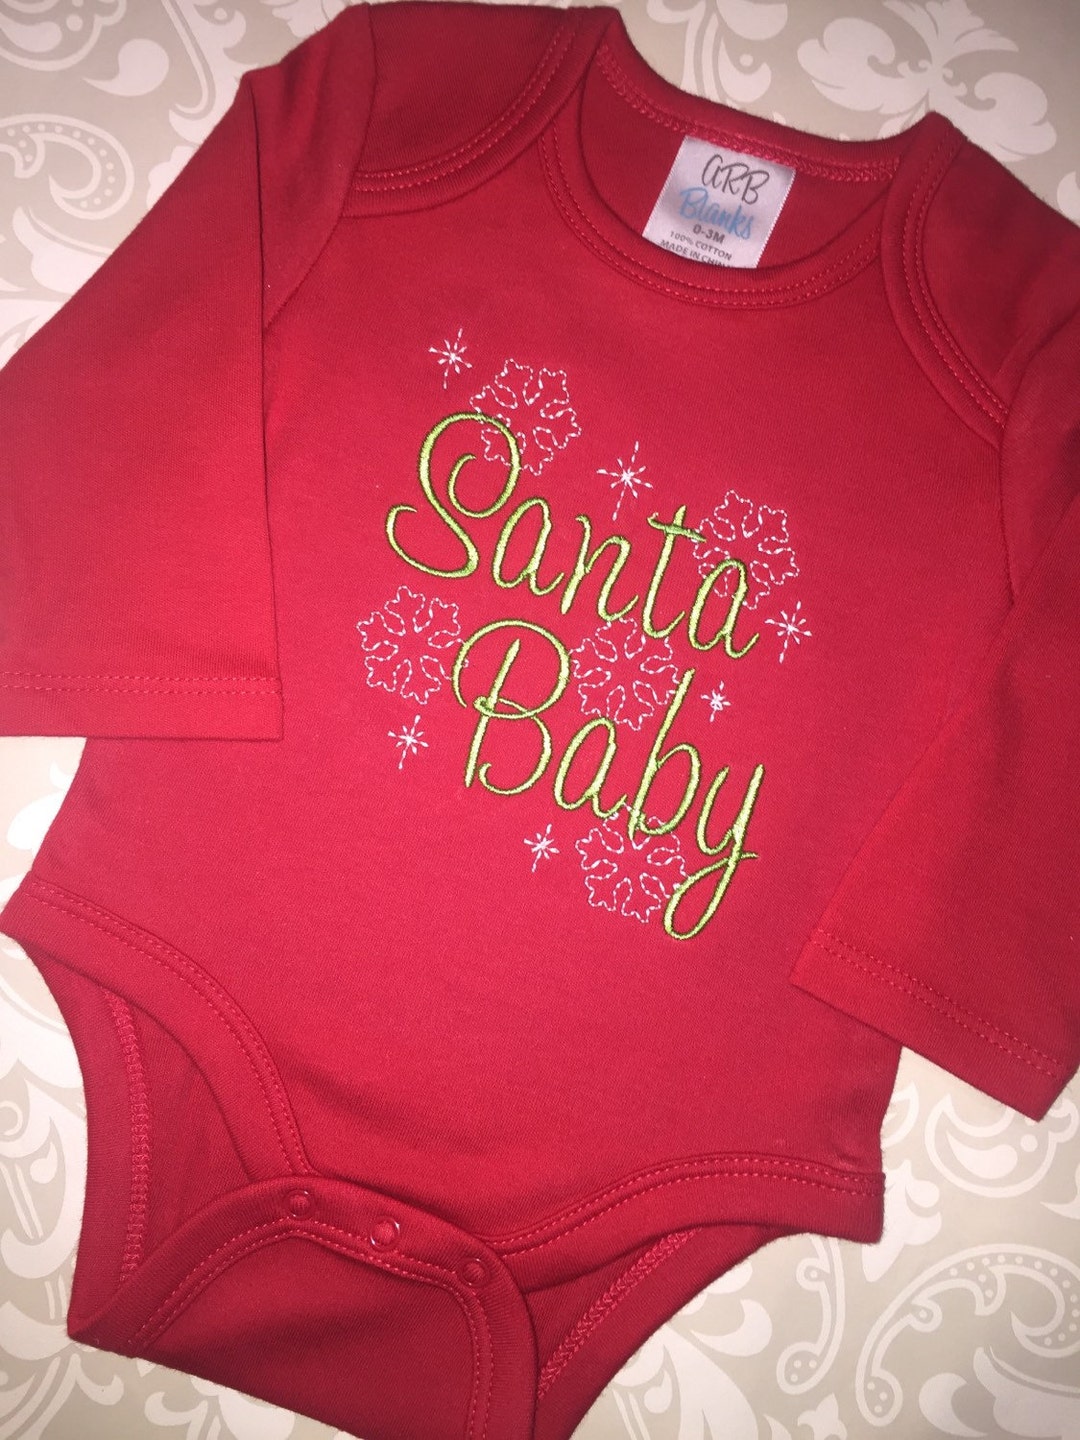 Christmas Santa Baby Bodysuit for Infants, Santa Baby Embroidered Red ...